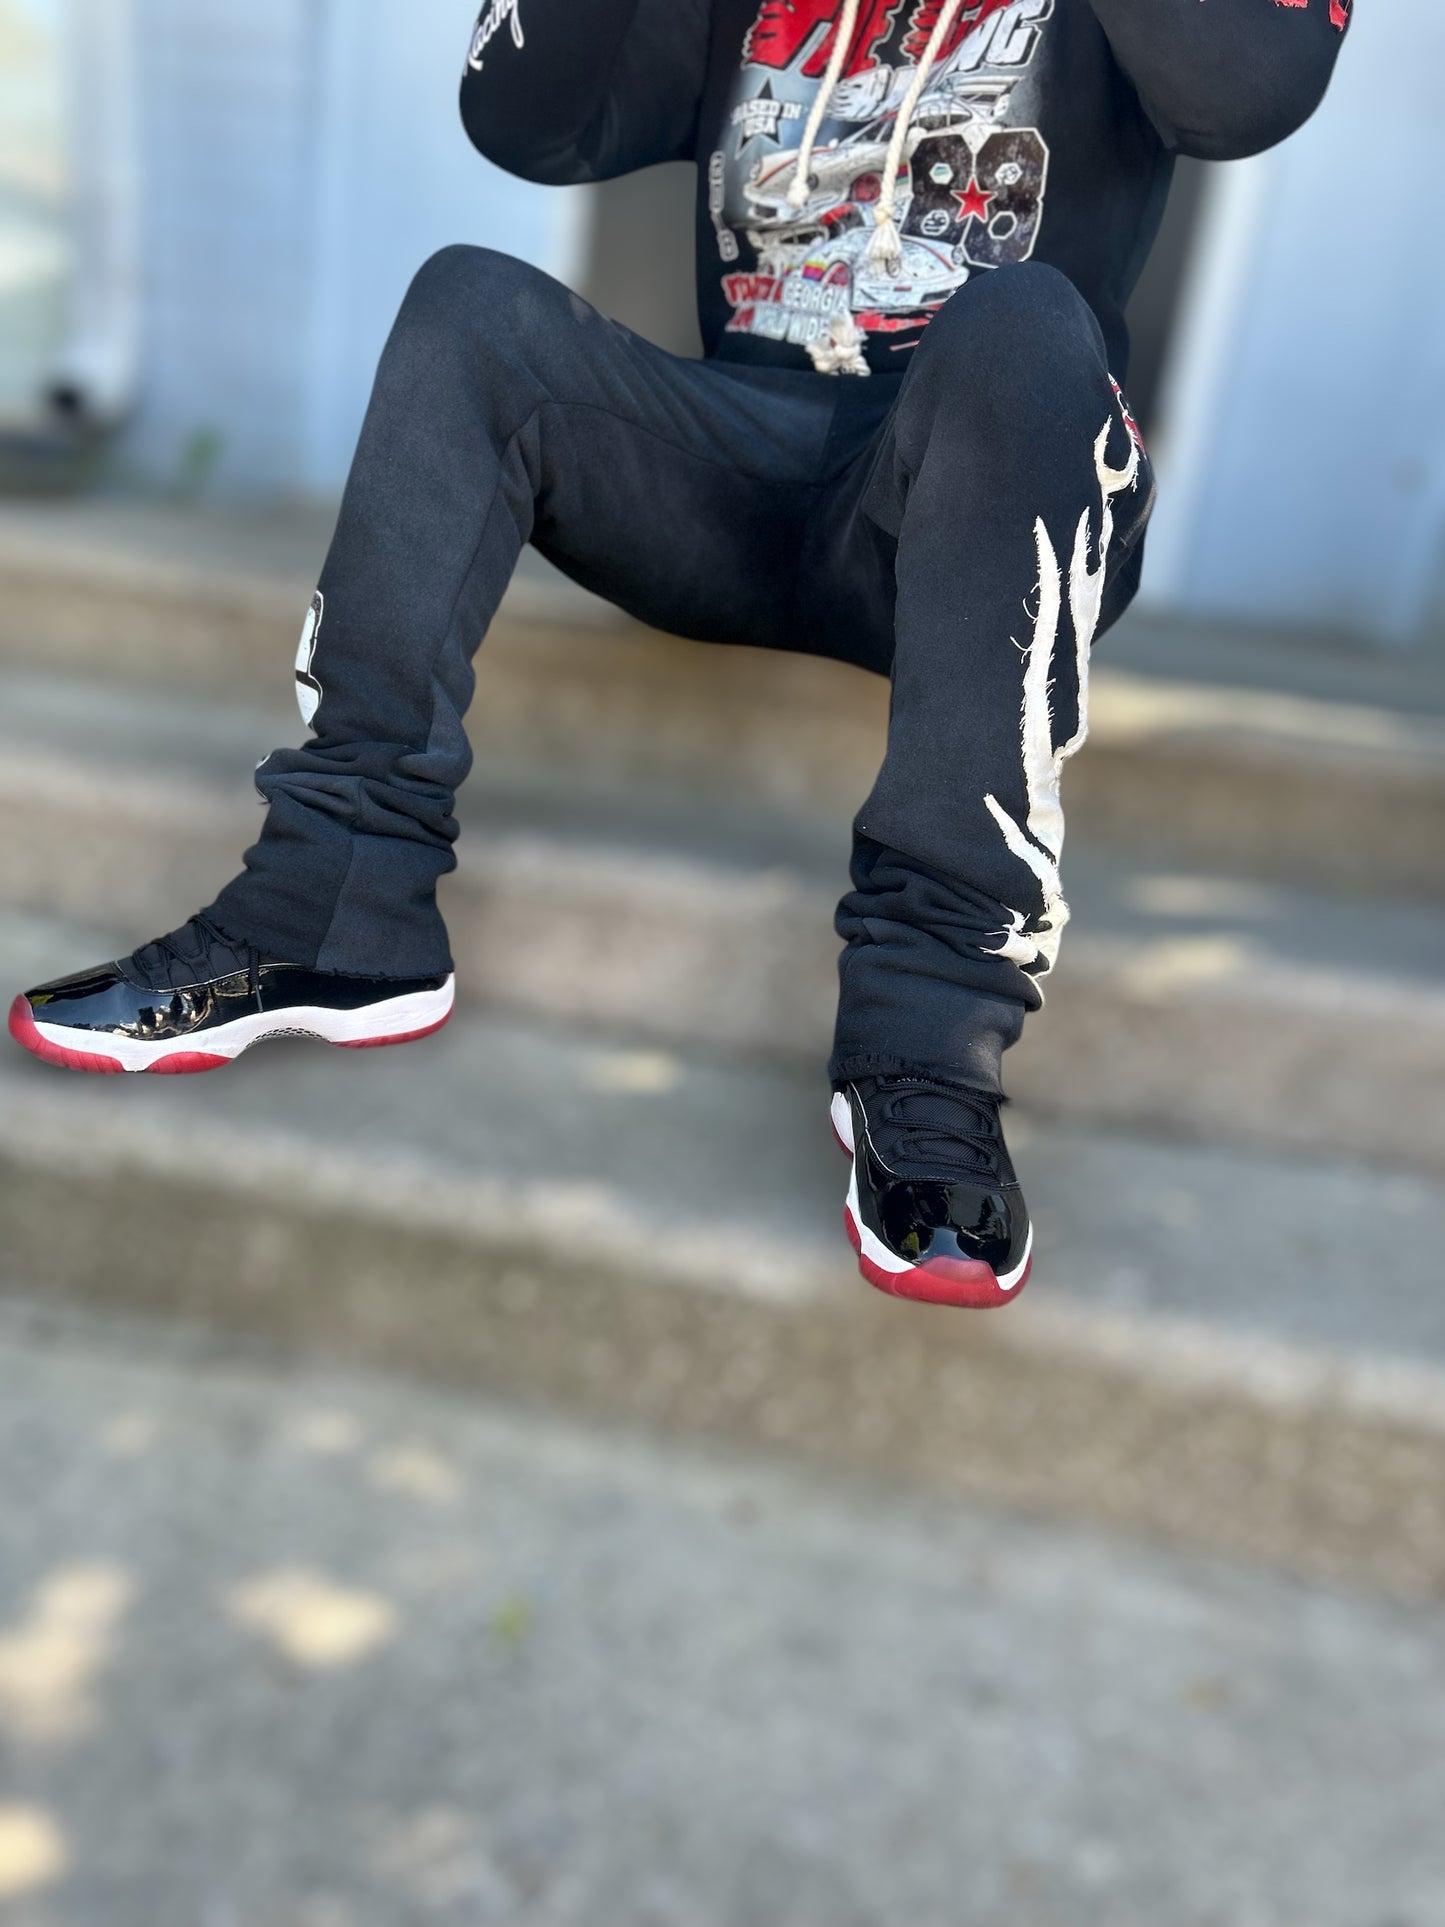 The G.O.A.T “RACING 2 THE MONEY” BLACK/WHITE/RED Hoodie & Jogger set